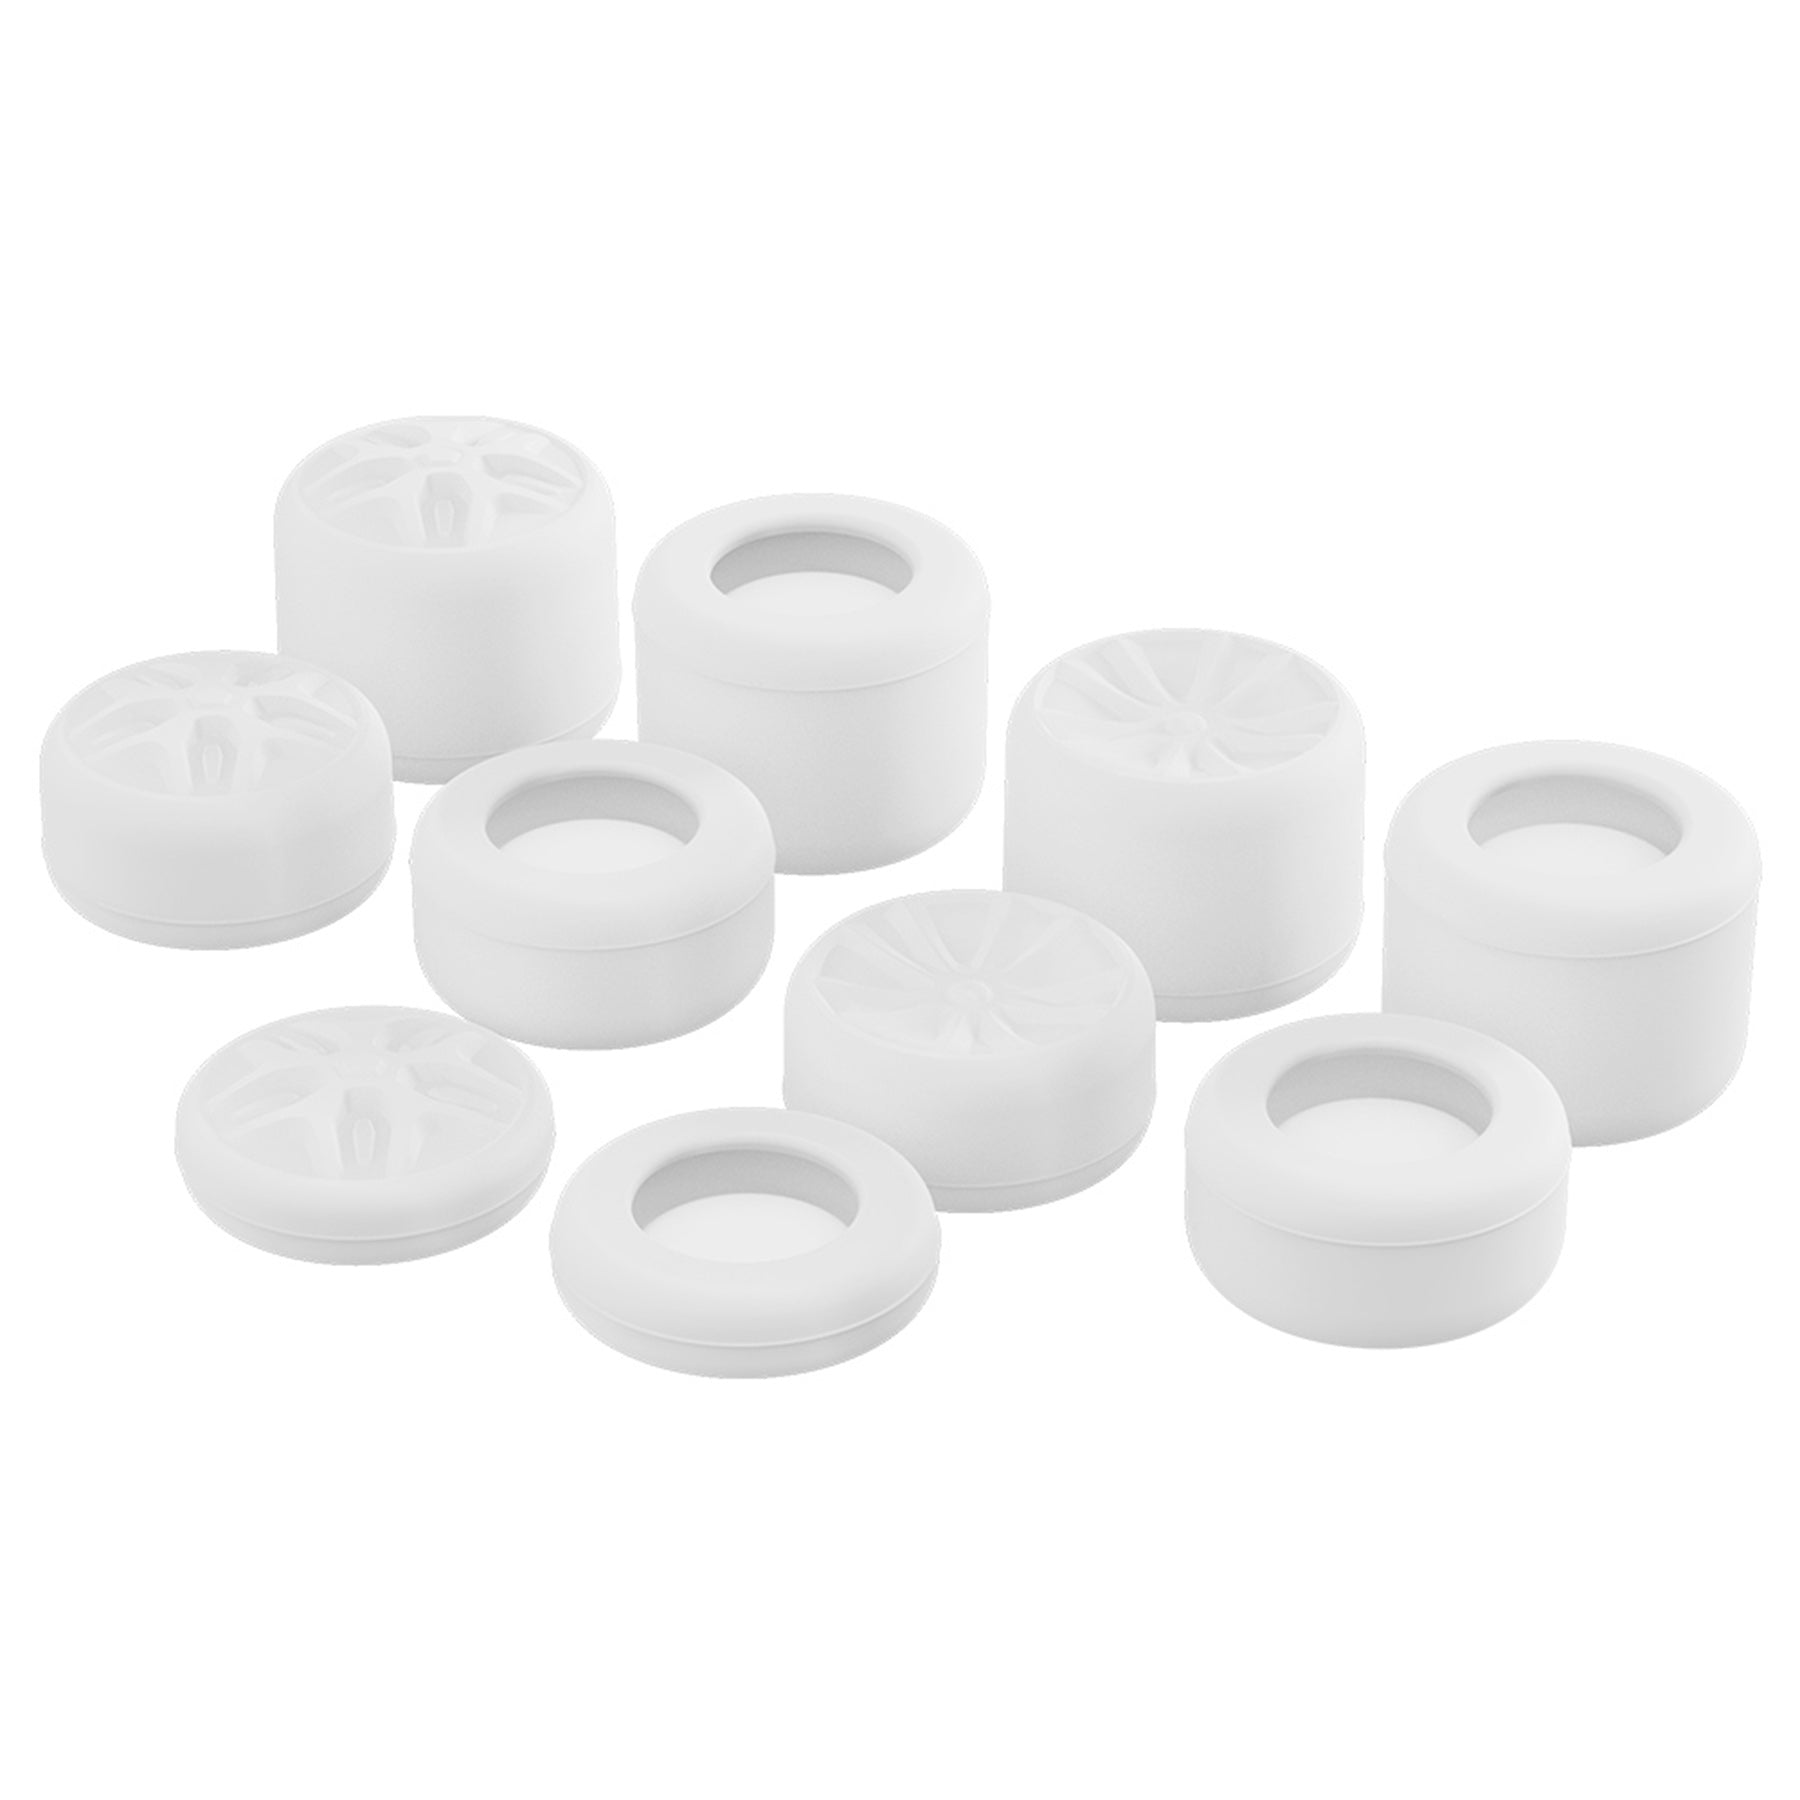 PlayVital White Ergonomic Analog Joystick Caps for Xbox Series X/S, Xbox One, Xbox One X/S, PS5, PS4, Switch Pro Controller - with 3 Height Convex and Concave - Pentagram & Rotary Wheels Design - PJM2018 PlayVital